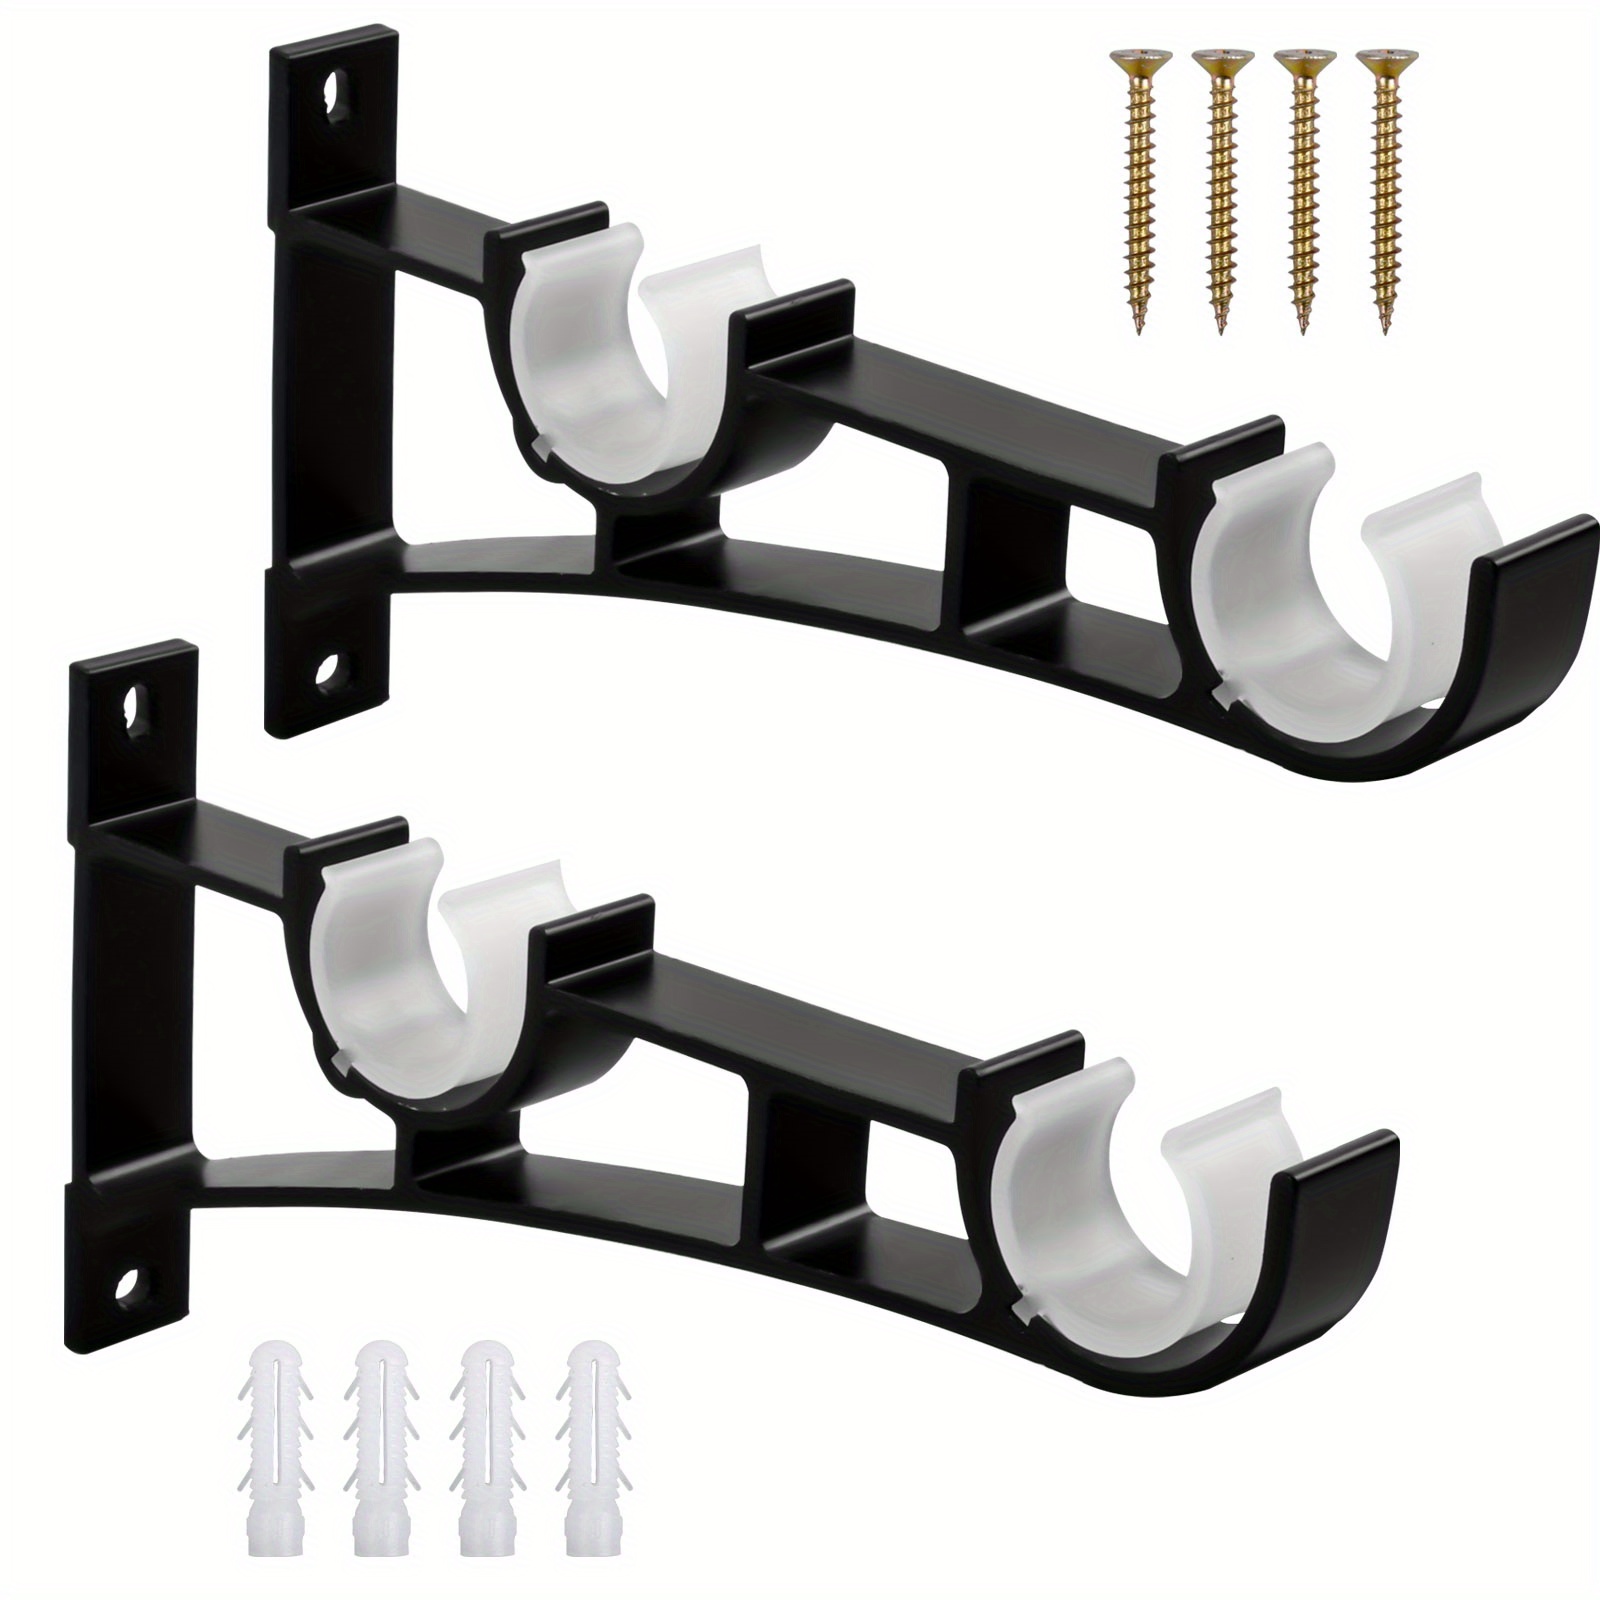 2 sets Heavy Duty Curtain Rod Brackets - Double Curtain Rod Holder Hooks  for Clothes Rods - Black Metal Curtain Pole Brackets with 4 Screws -  Supports